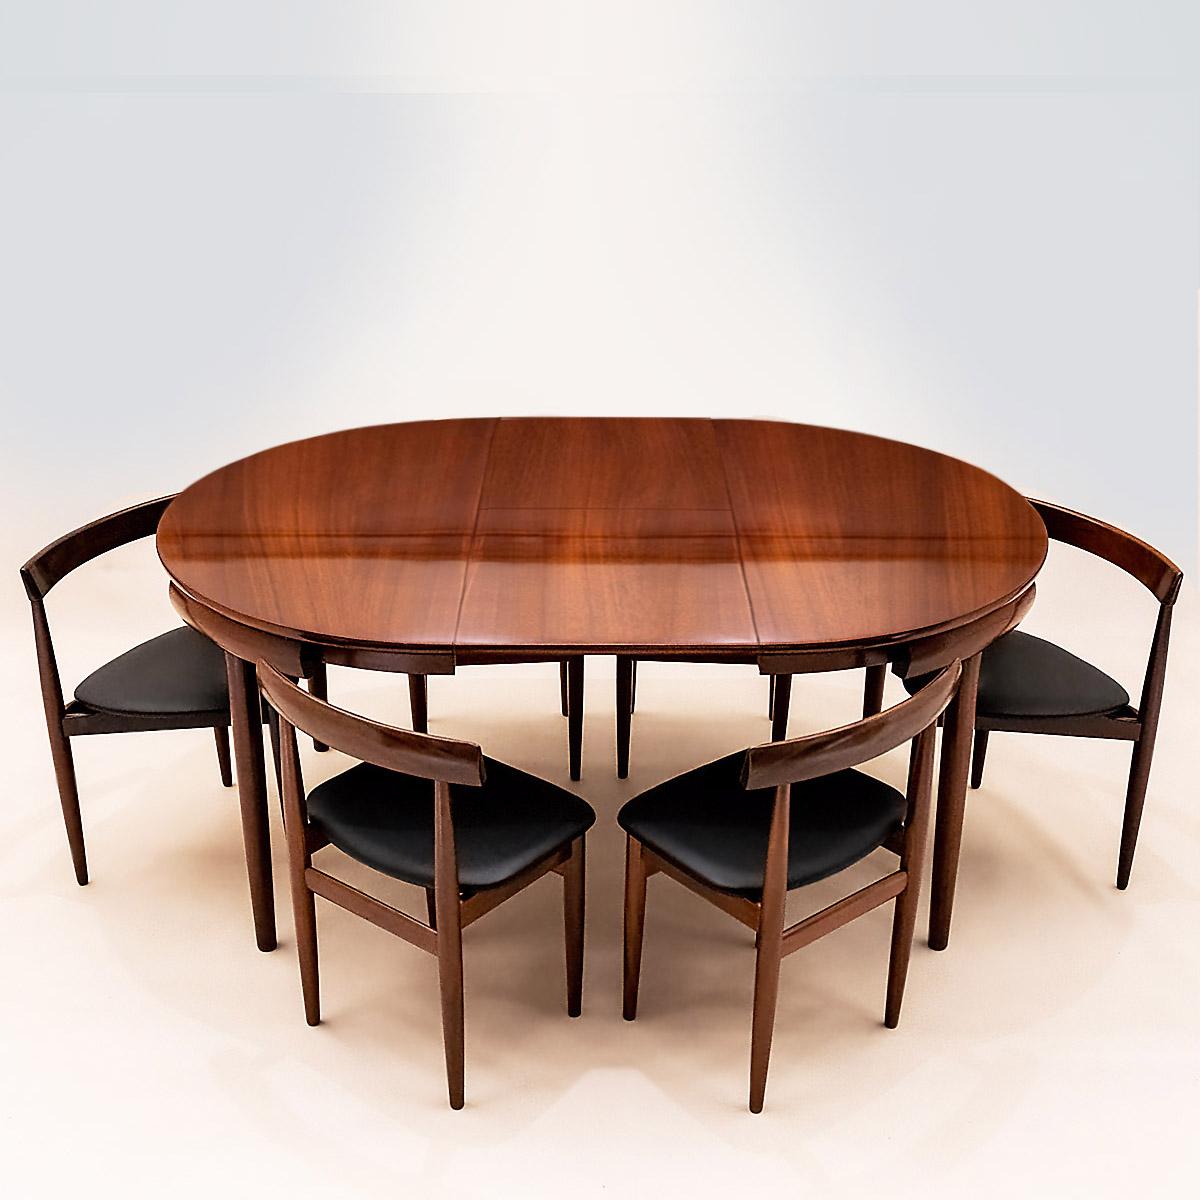 Danish Mid Century Hans Olsen Roundette space saving extending teak dining table with 6 black leather and teak chairs by Frem Røjle.

Originally designed by Hans Olsen in 1952 for Frem Røjle this dining set has since become an icon of classic